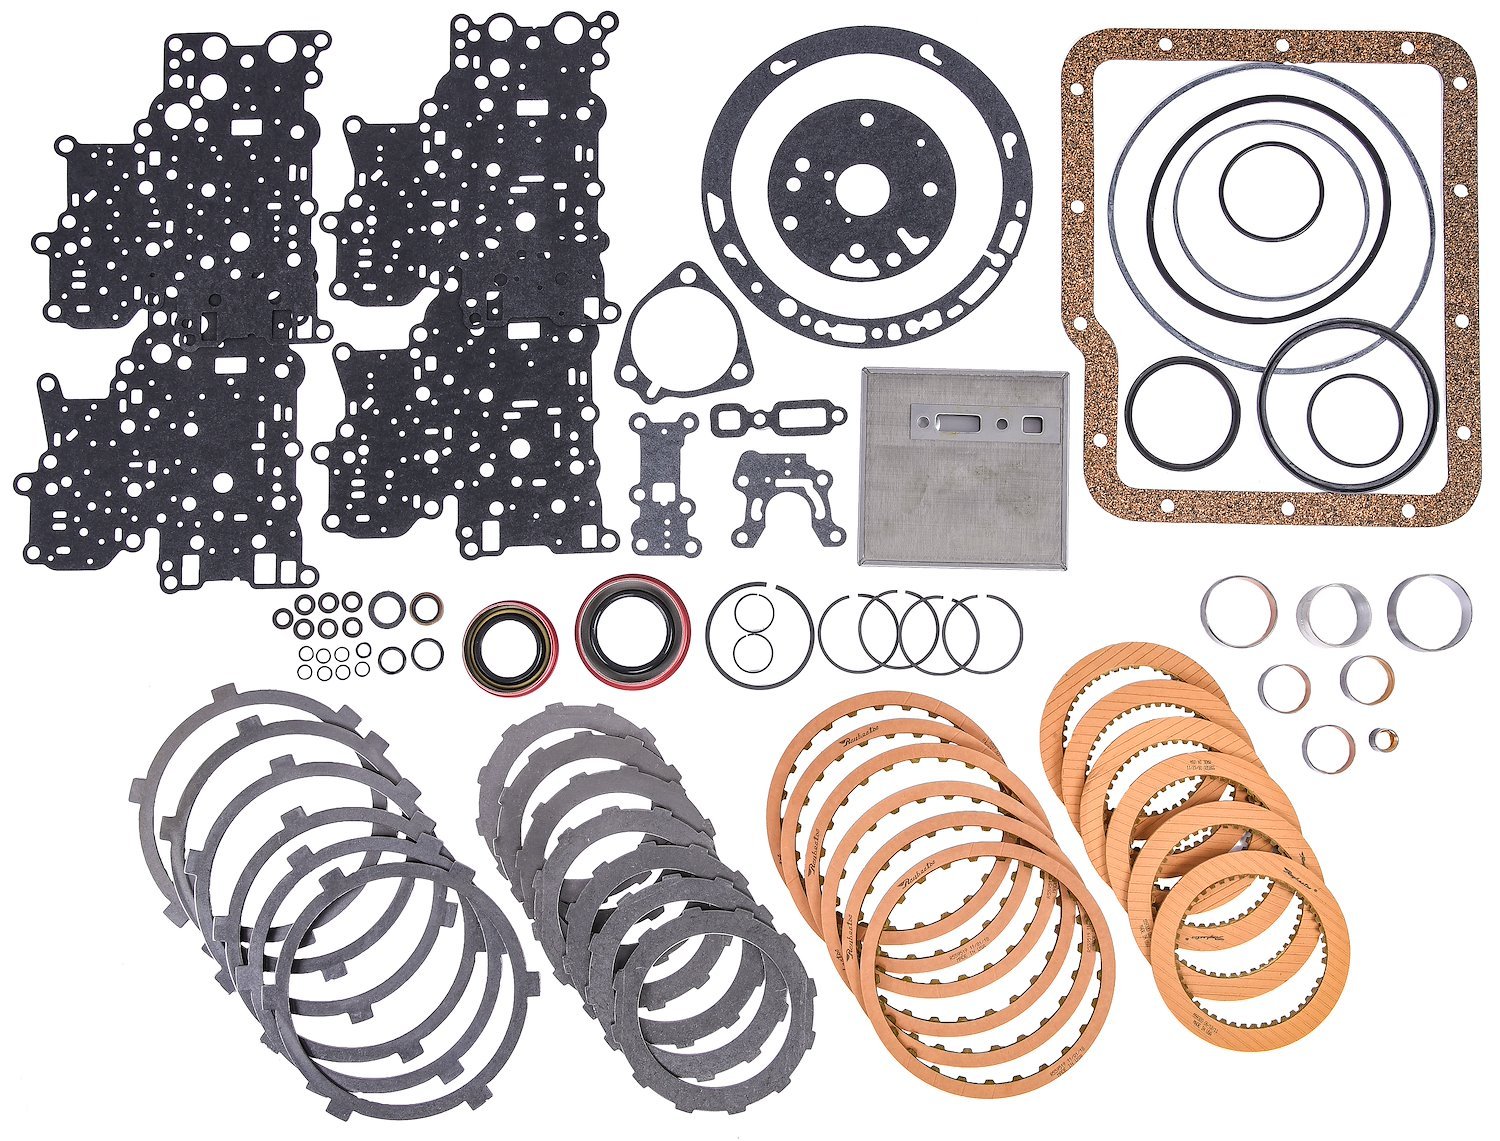 Automatic Transmission Rebuild Kit for 1962-1973 GM Powerglide [Complete Kit]